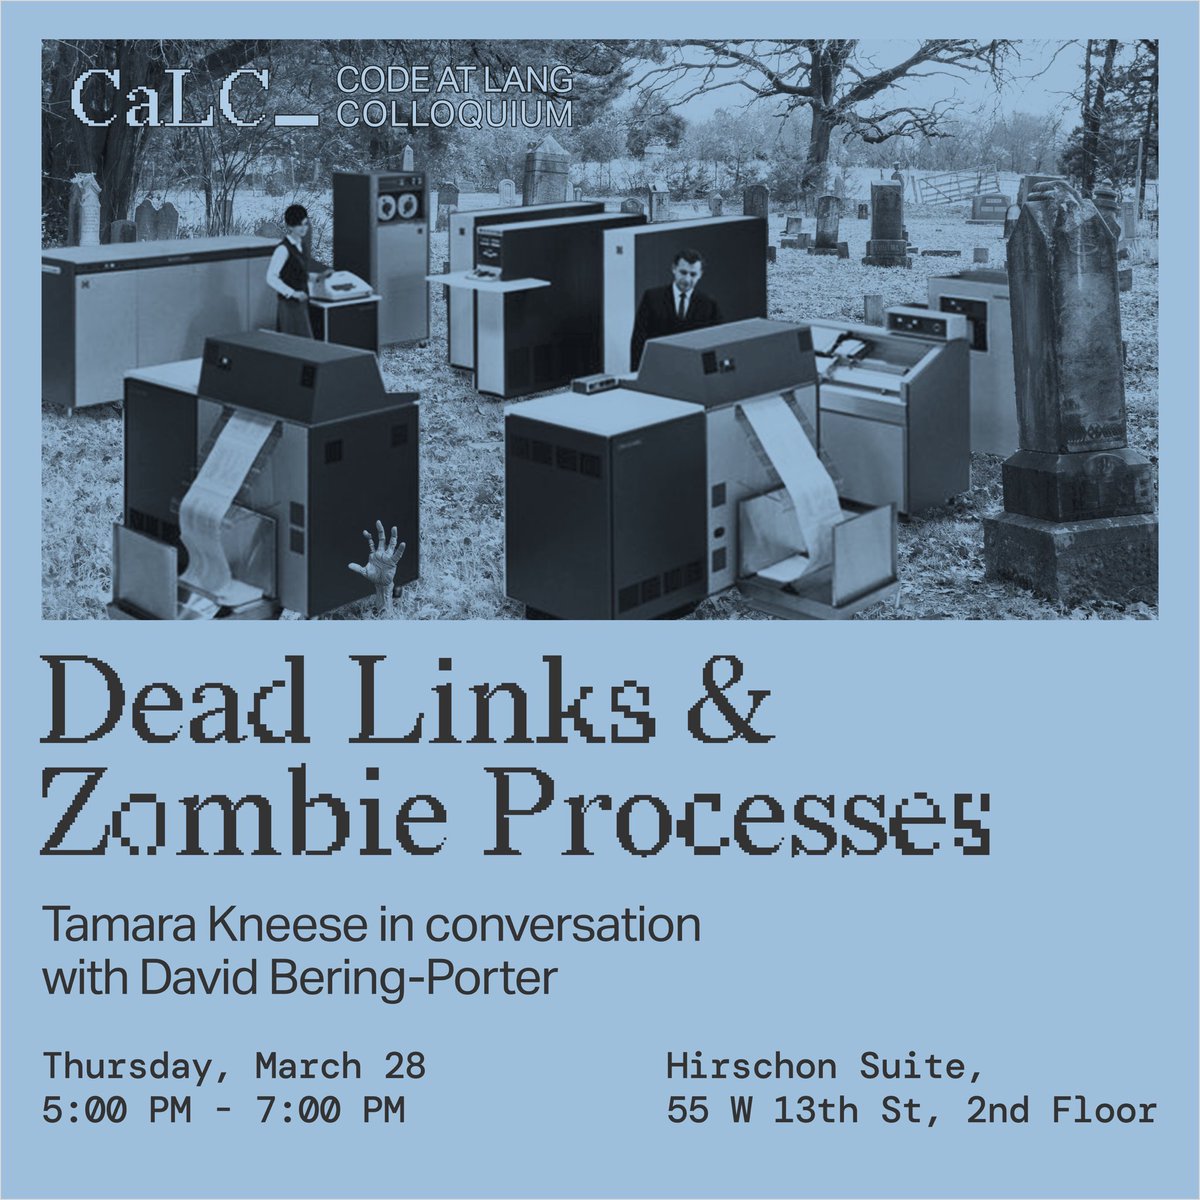 Thanks to @rorys and @atg_dbp for hosting me at @EugeneLang for this inaugural Code at Lang Colloquium event March 28, 5-7 PM ET at The New School